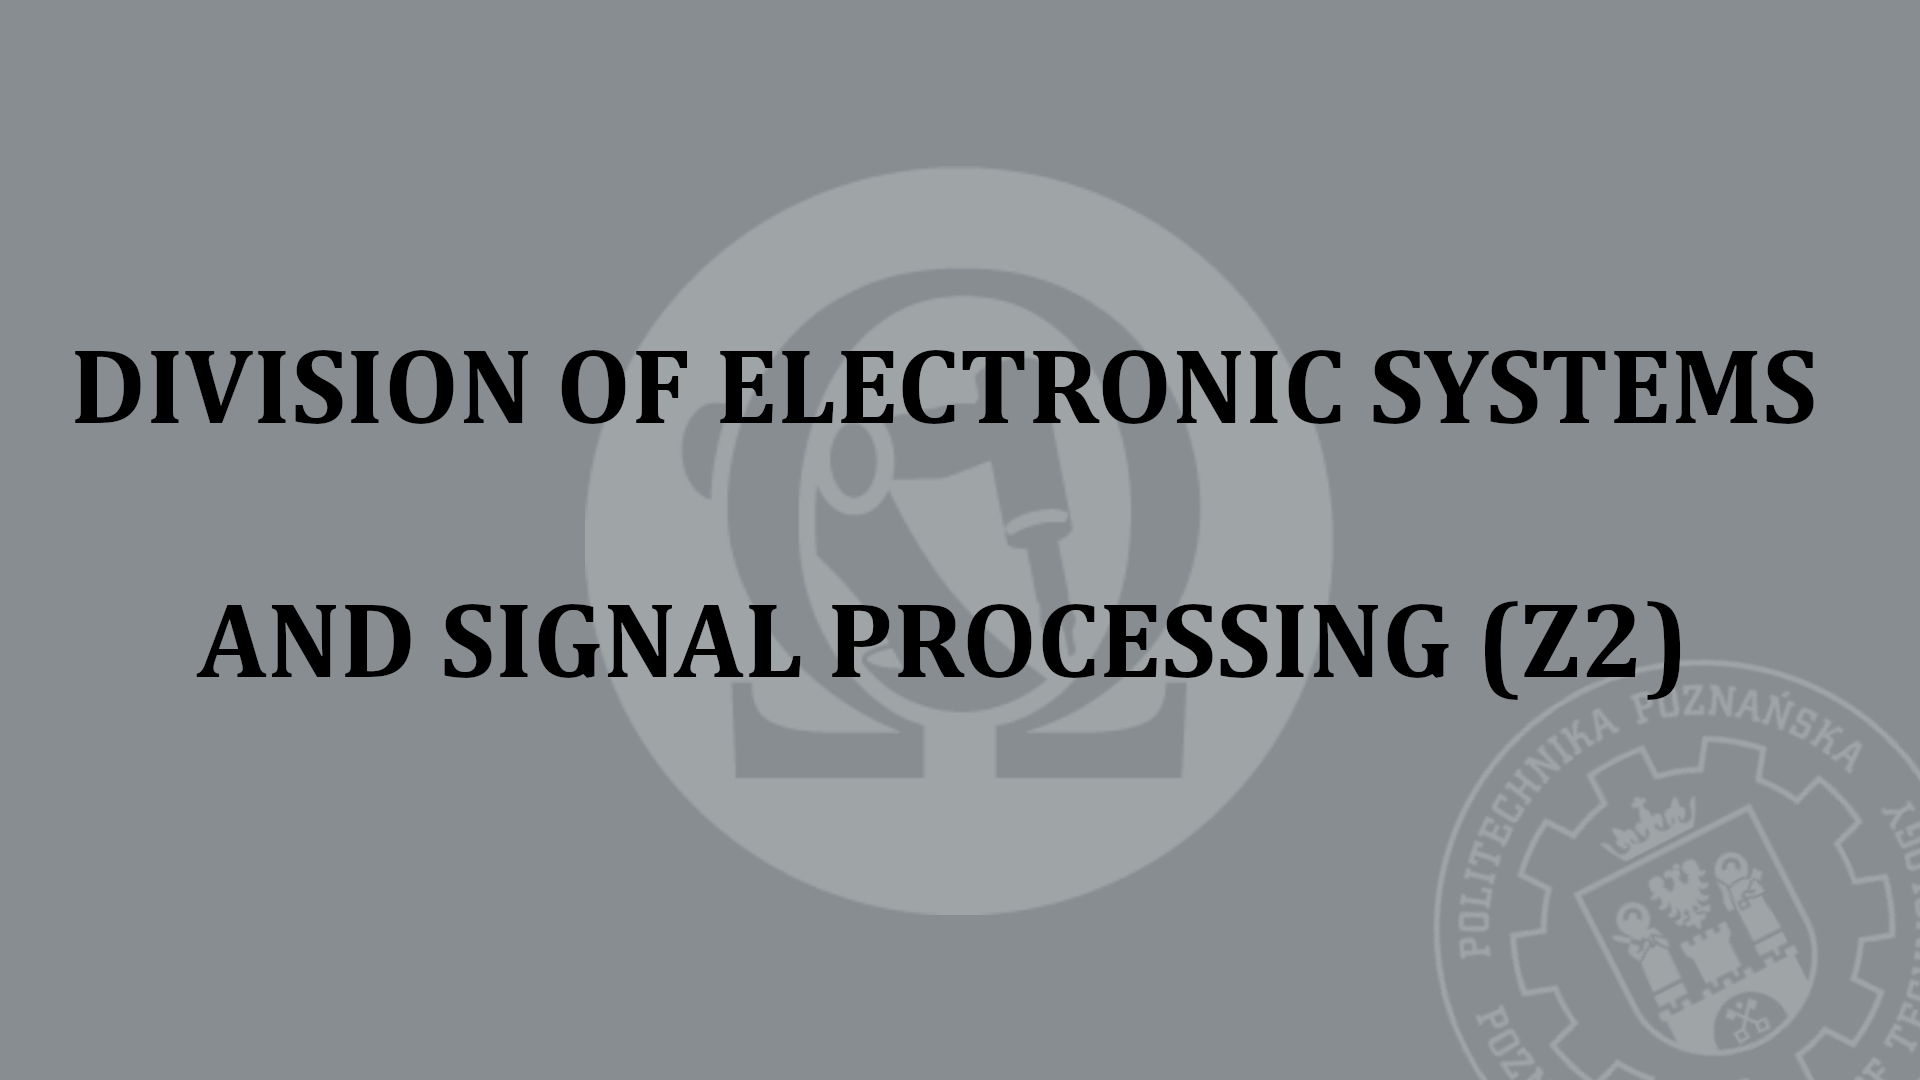 Division of Electronic Systems and Signal Processing 